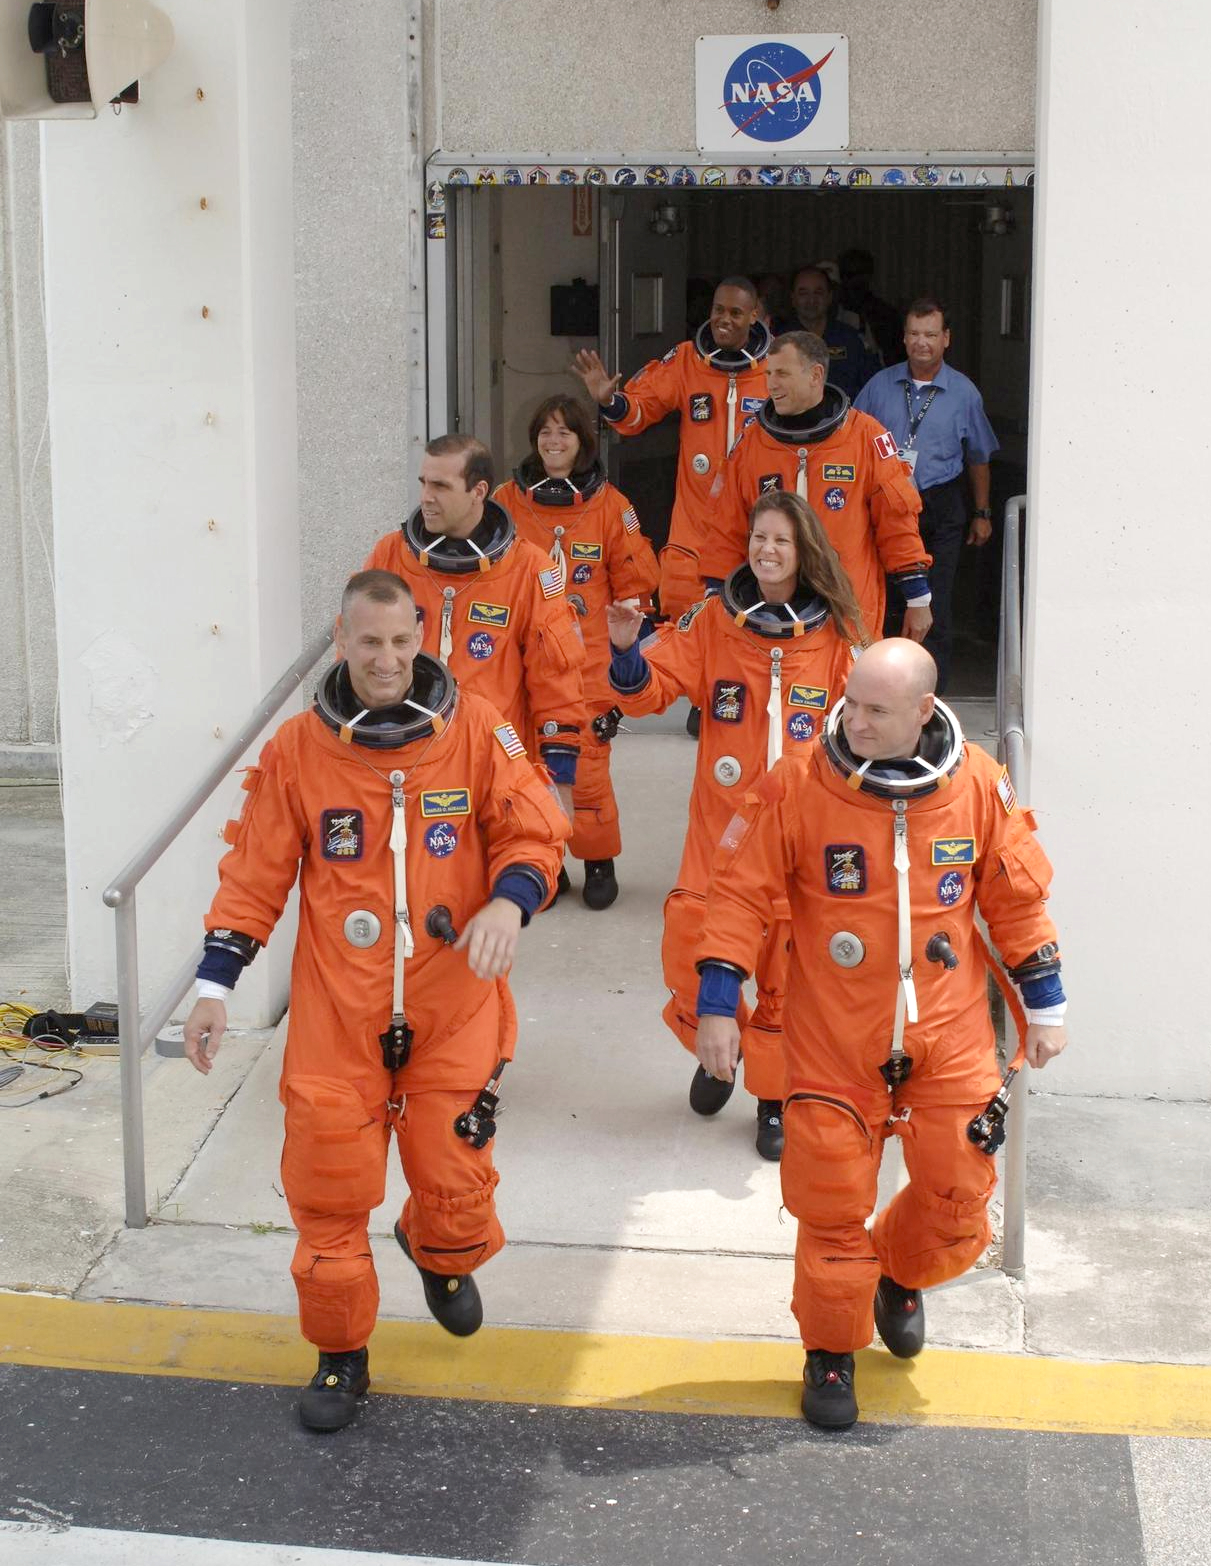 The STS-118 crew strode out of the Operations and Checkout Building eager to get to Launch Pad 39A for launch of Space Shuttle Endeavour at 6:36 p.m. EDT. Leading the way are (left and right) Pilot Charlie Hobaugh and Commander Scott Kelly. Behind them, clockwise, are Mission Specialists Rick Mastracchio, teacher-turned-astronaut Barbara Morgan, Alvin Drew, Dave Williams and Tracy Caldwell. Williams represents the Canadian Space Agency. The STS-118 mission was the 22nd shuttle flight to the International Space Station. Photo credit: NASA/Kim Shiflett